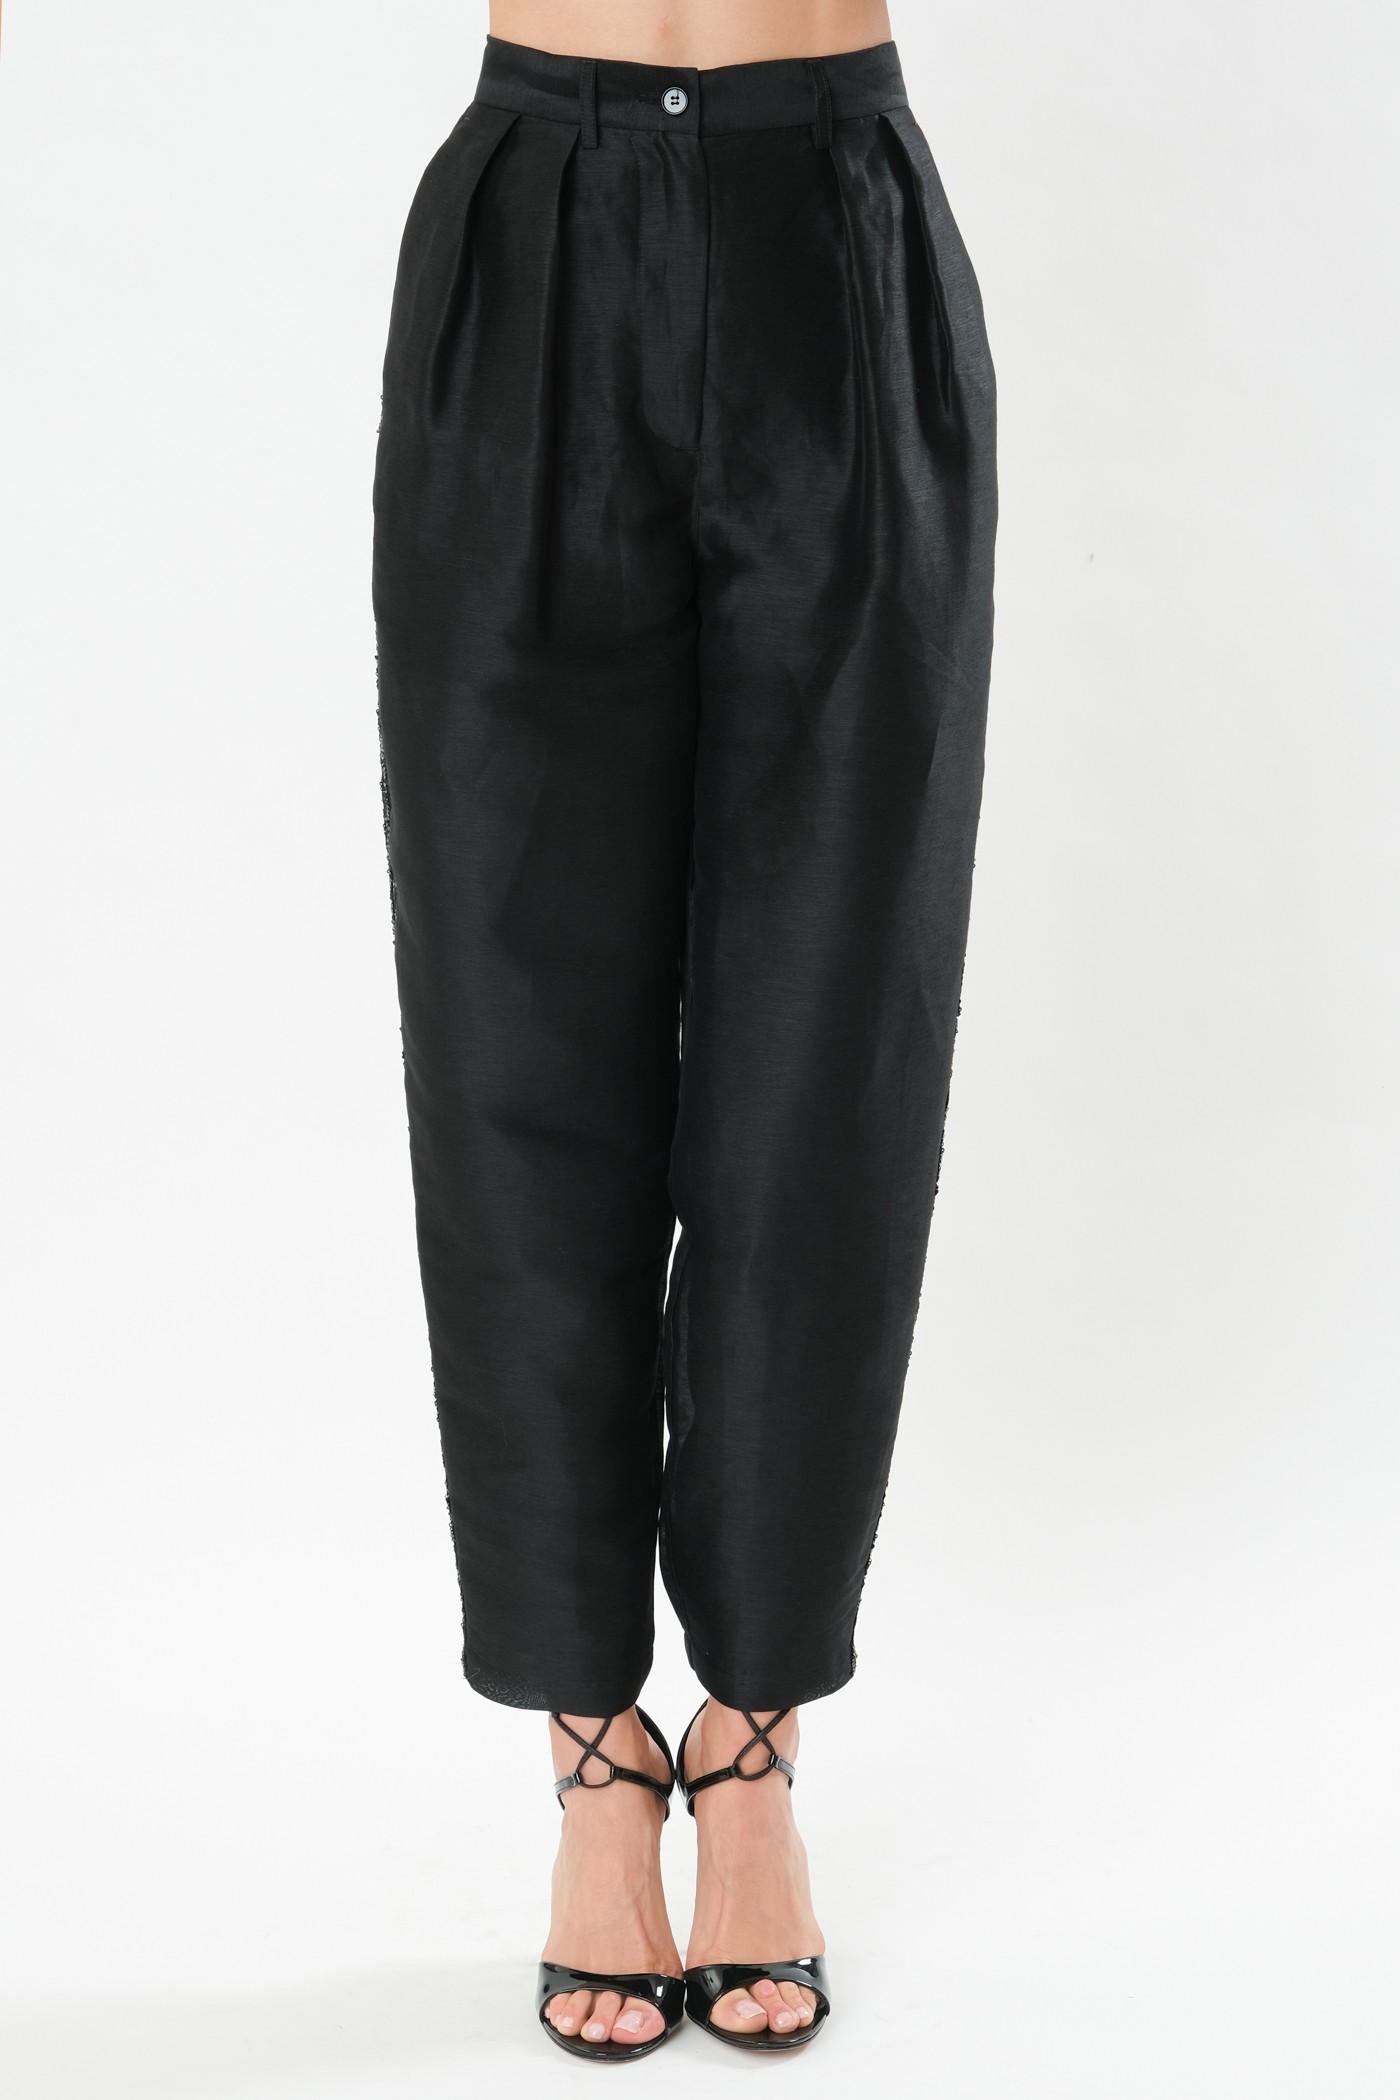 Linen trousers with pleats and sequins on the side, women's